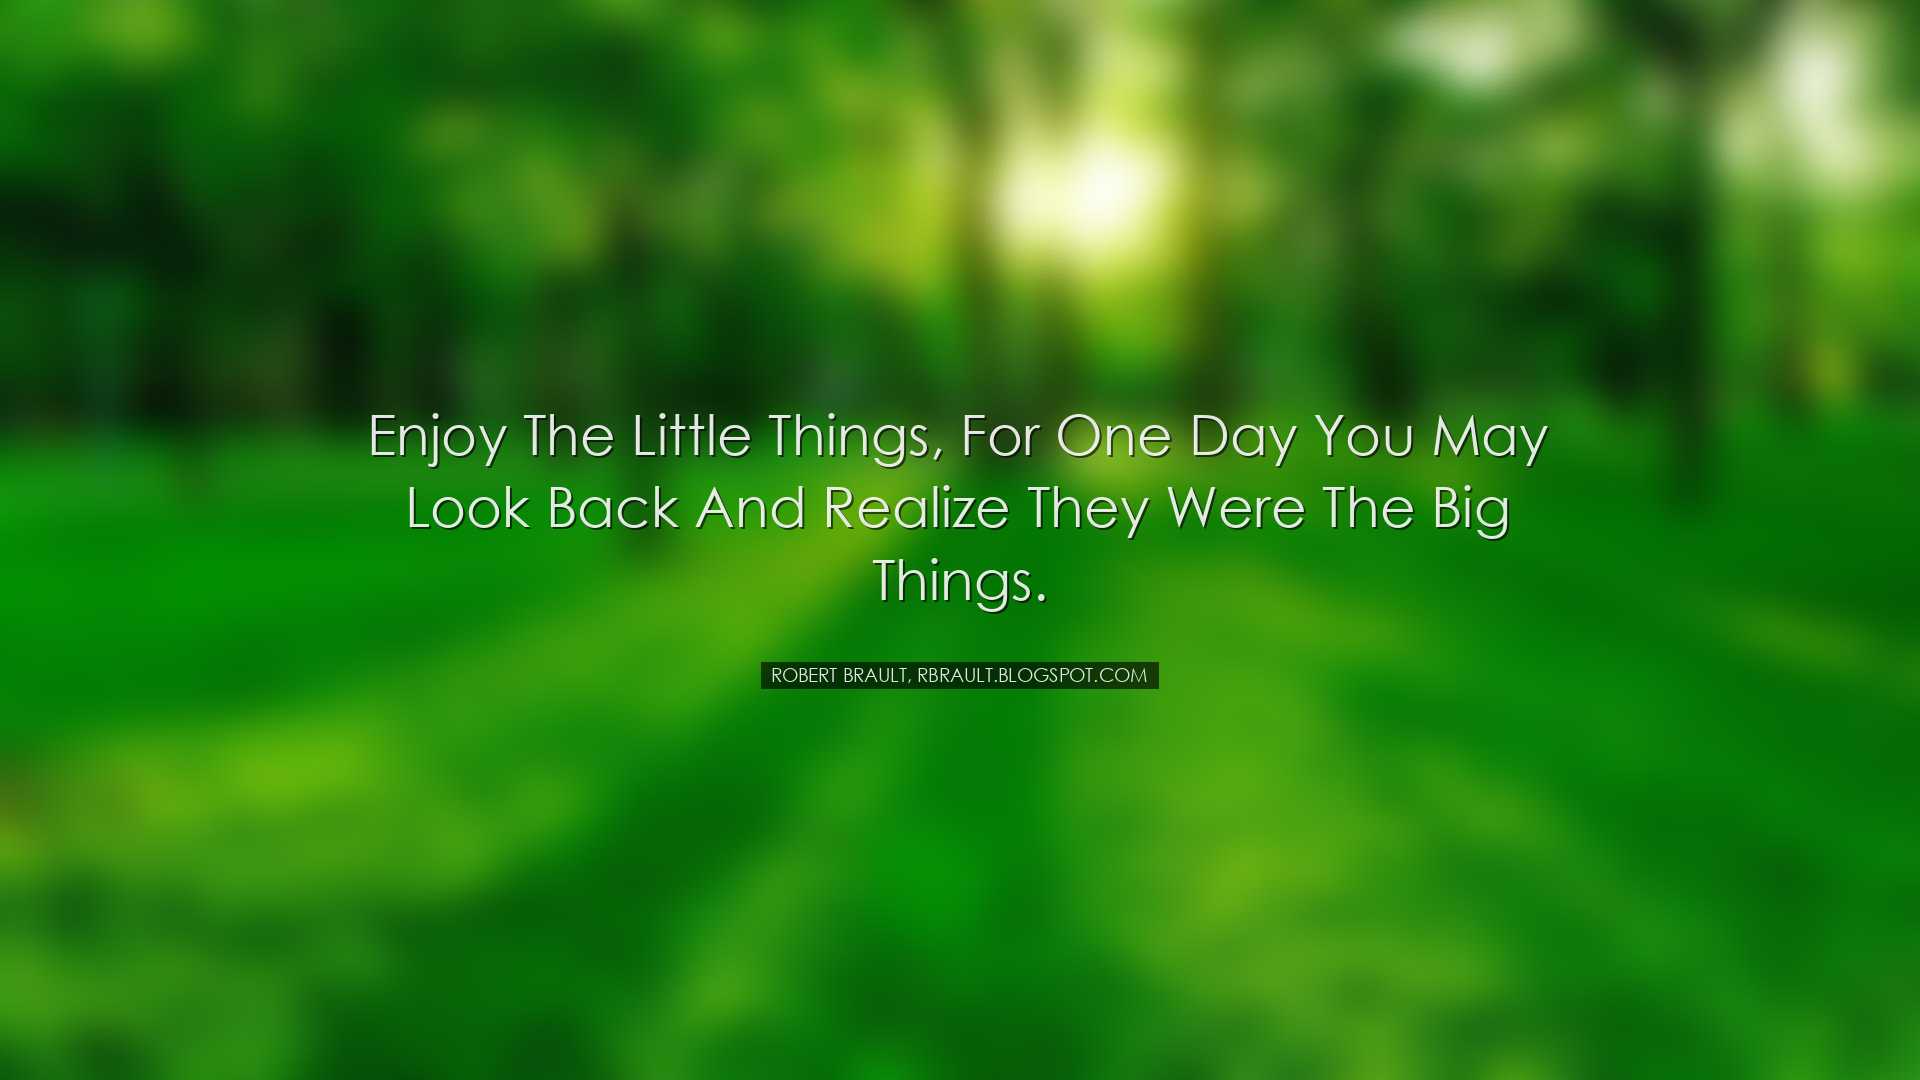 Enjoy the little things, for one day you may look back and realize